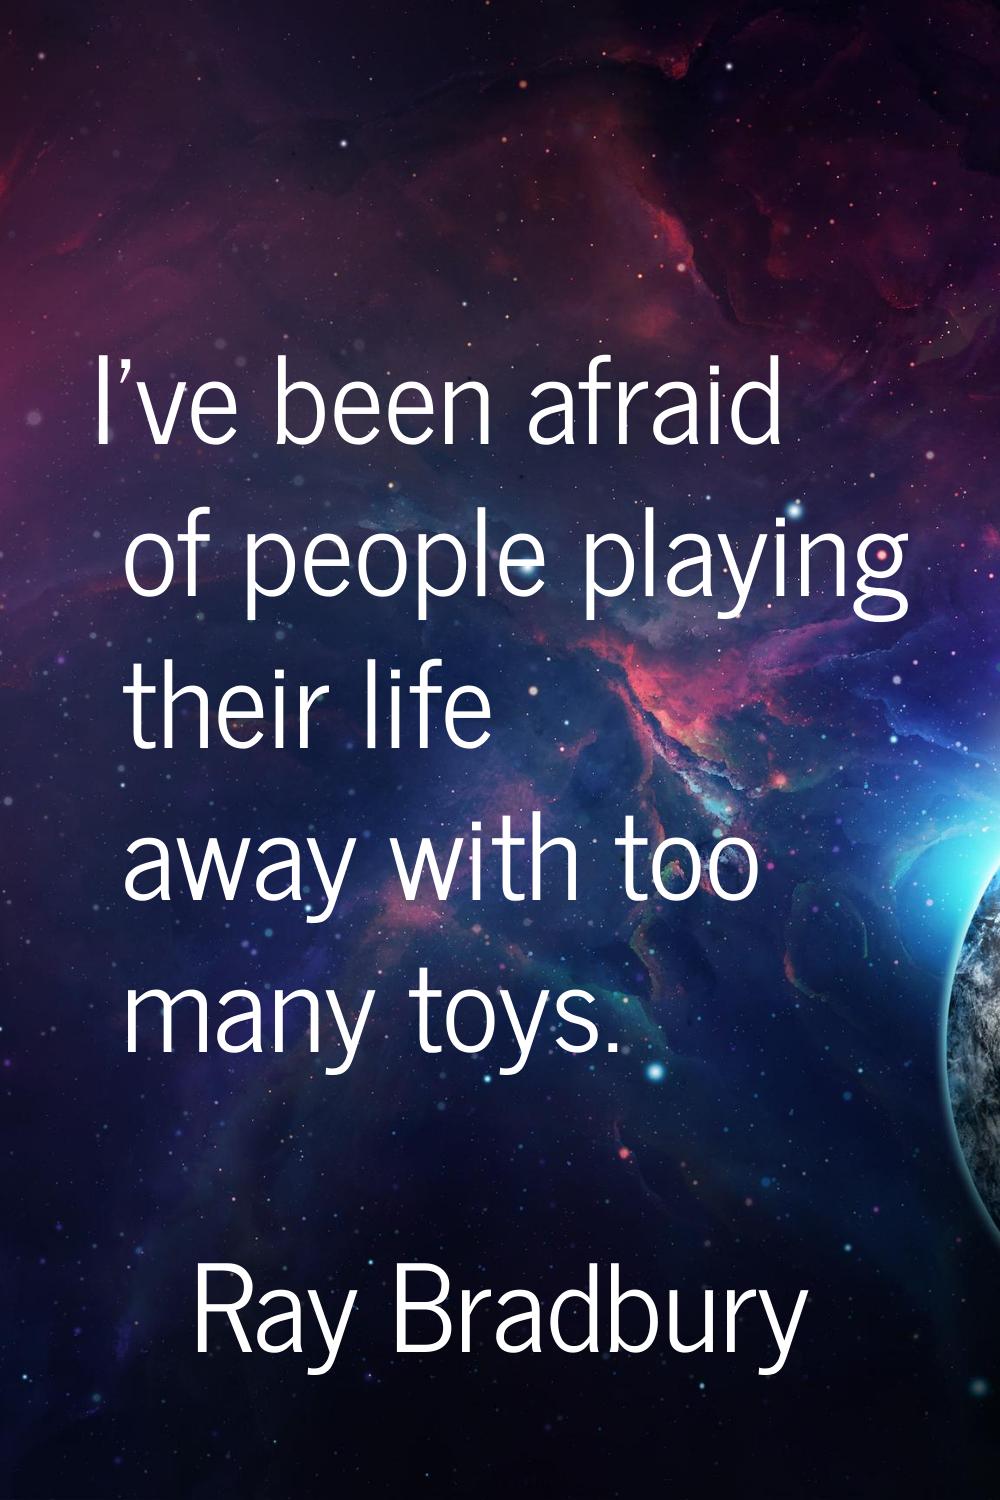 I've been afraid of people playing their life away with too many toys.